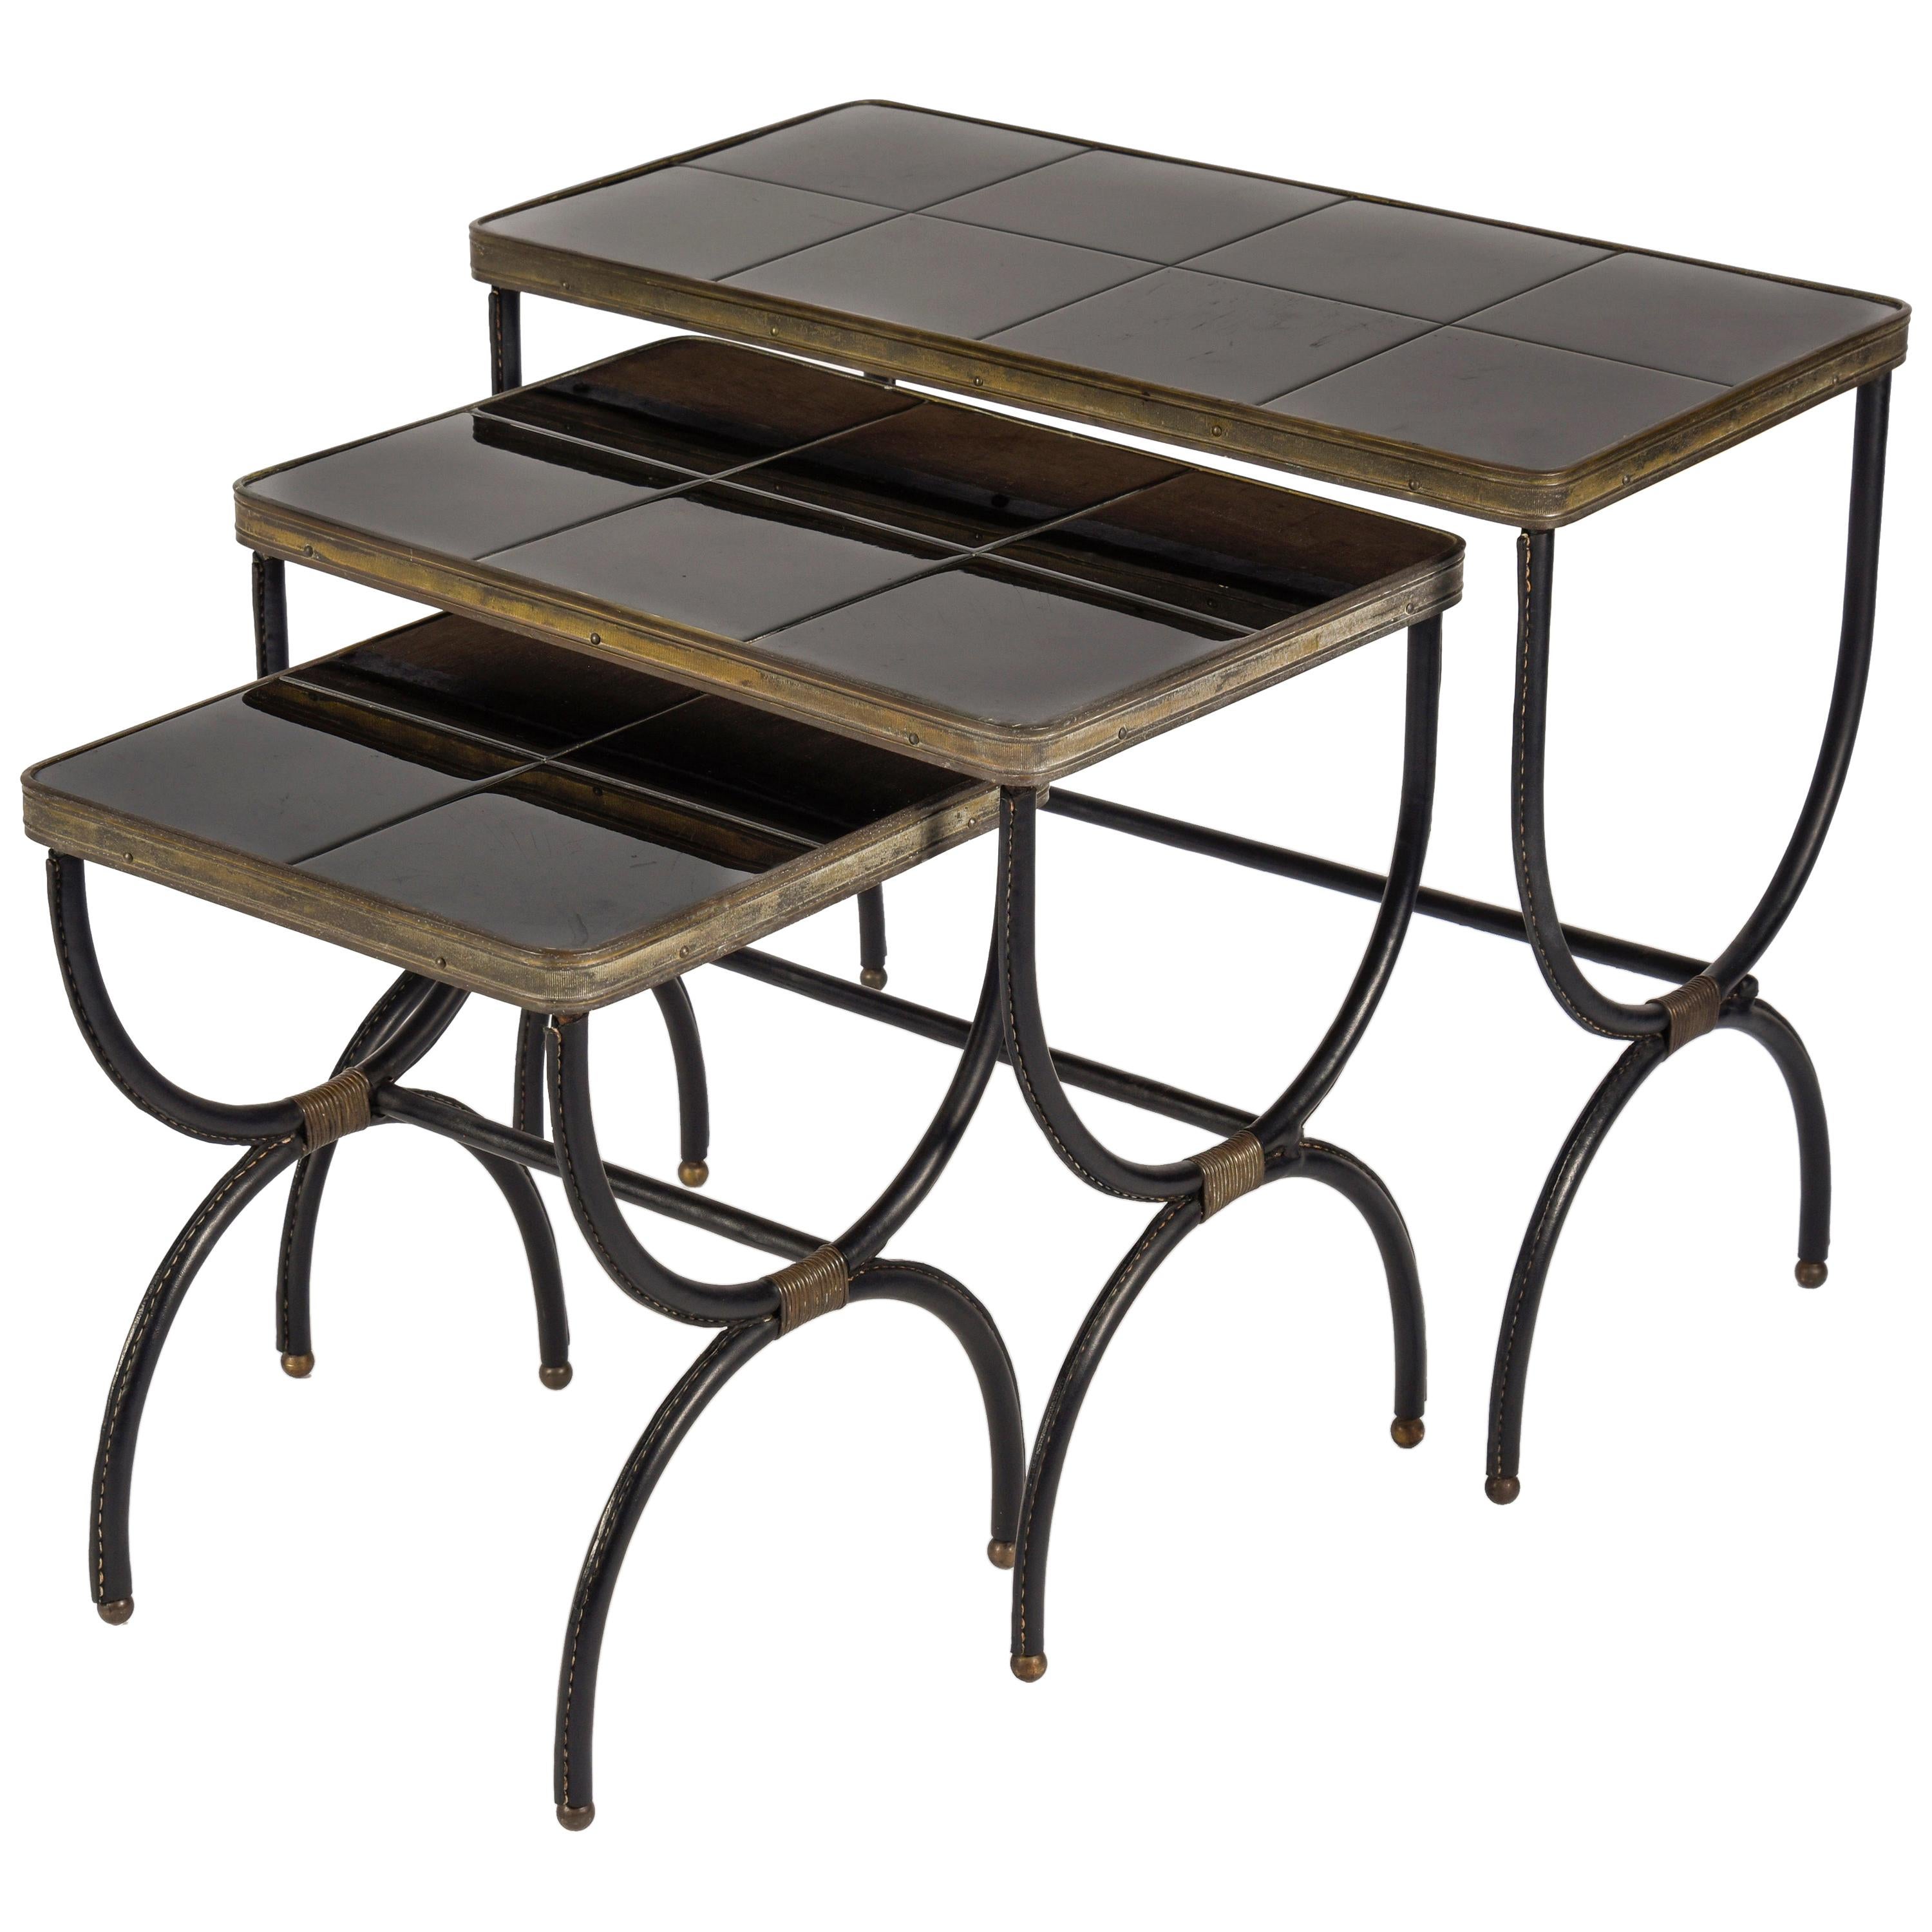 Set of Nesting Tables in Stitched Leather by Jacques Adnet